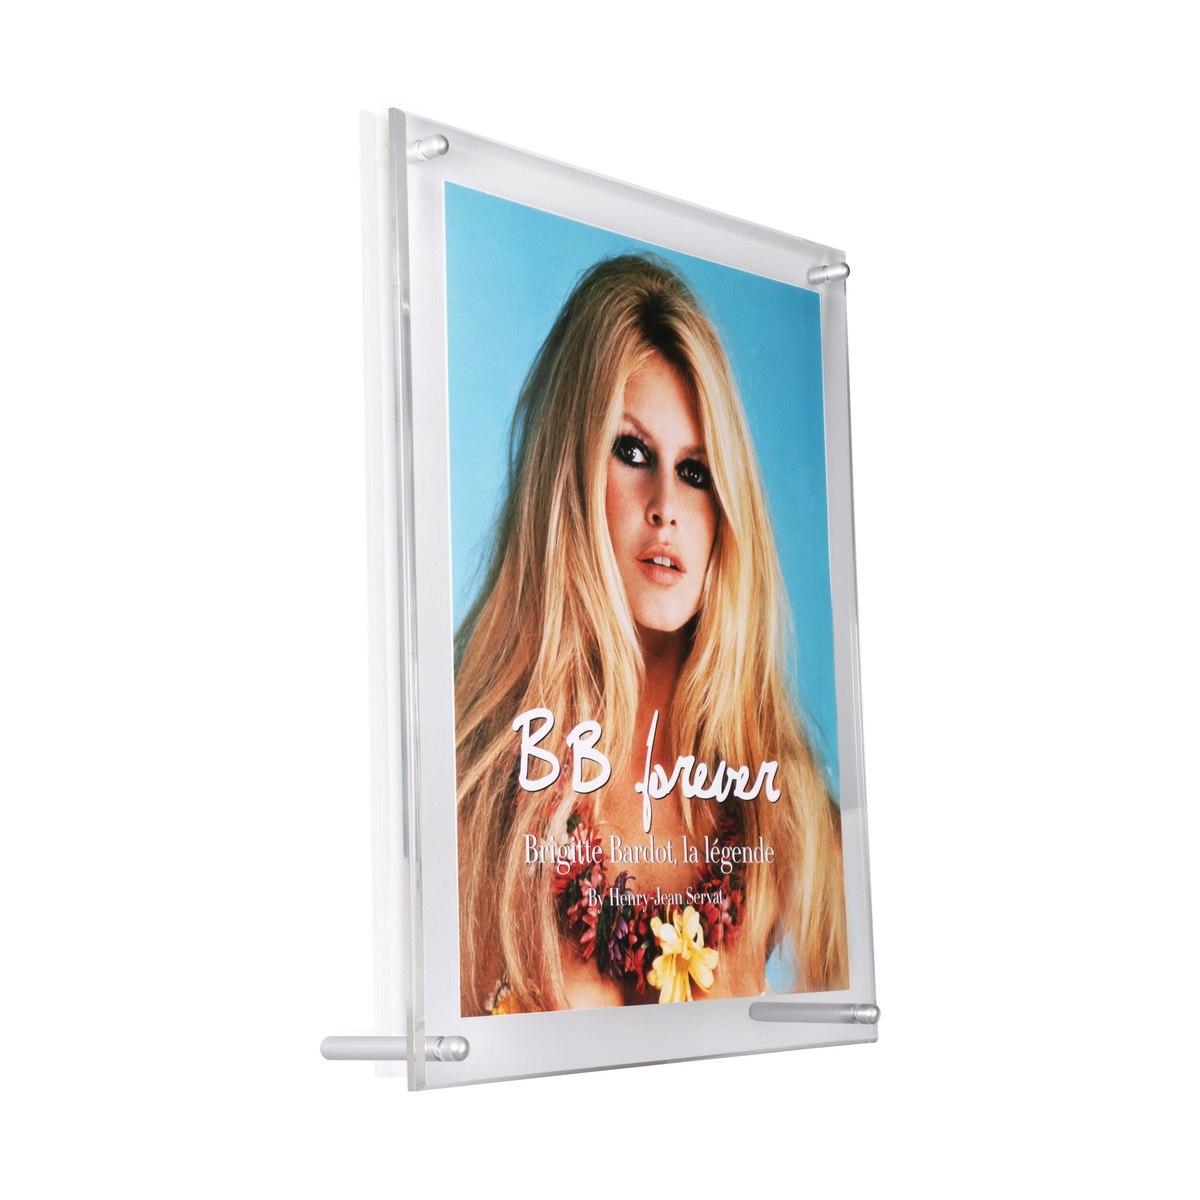 Set of 2 Clear Acrylic Frame for Media 12.5'' x 10'' (Without Standoffs)